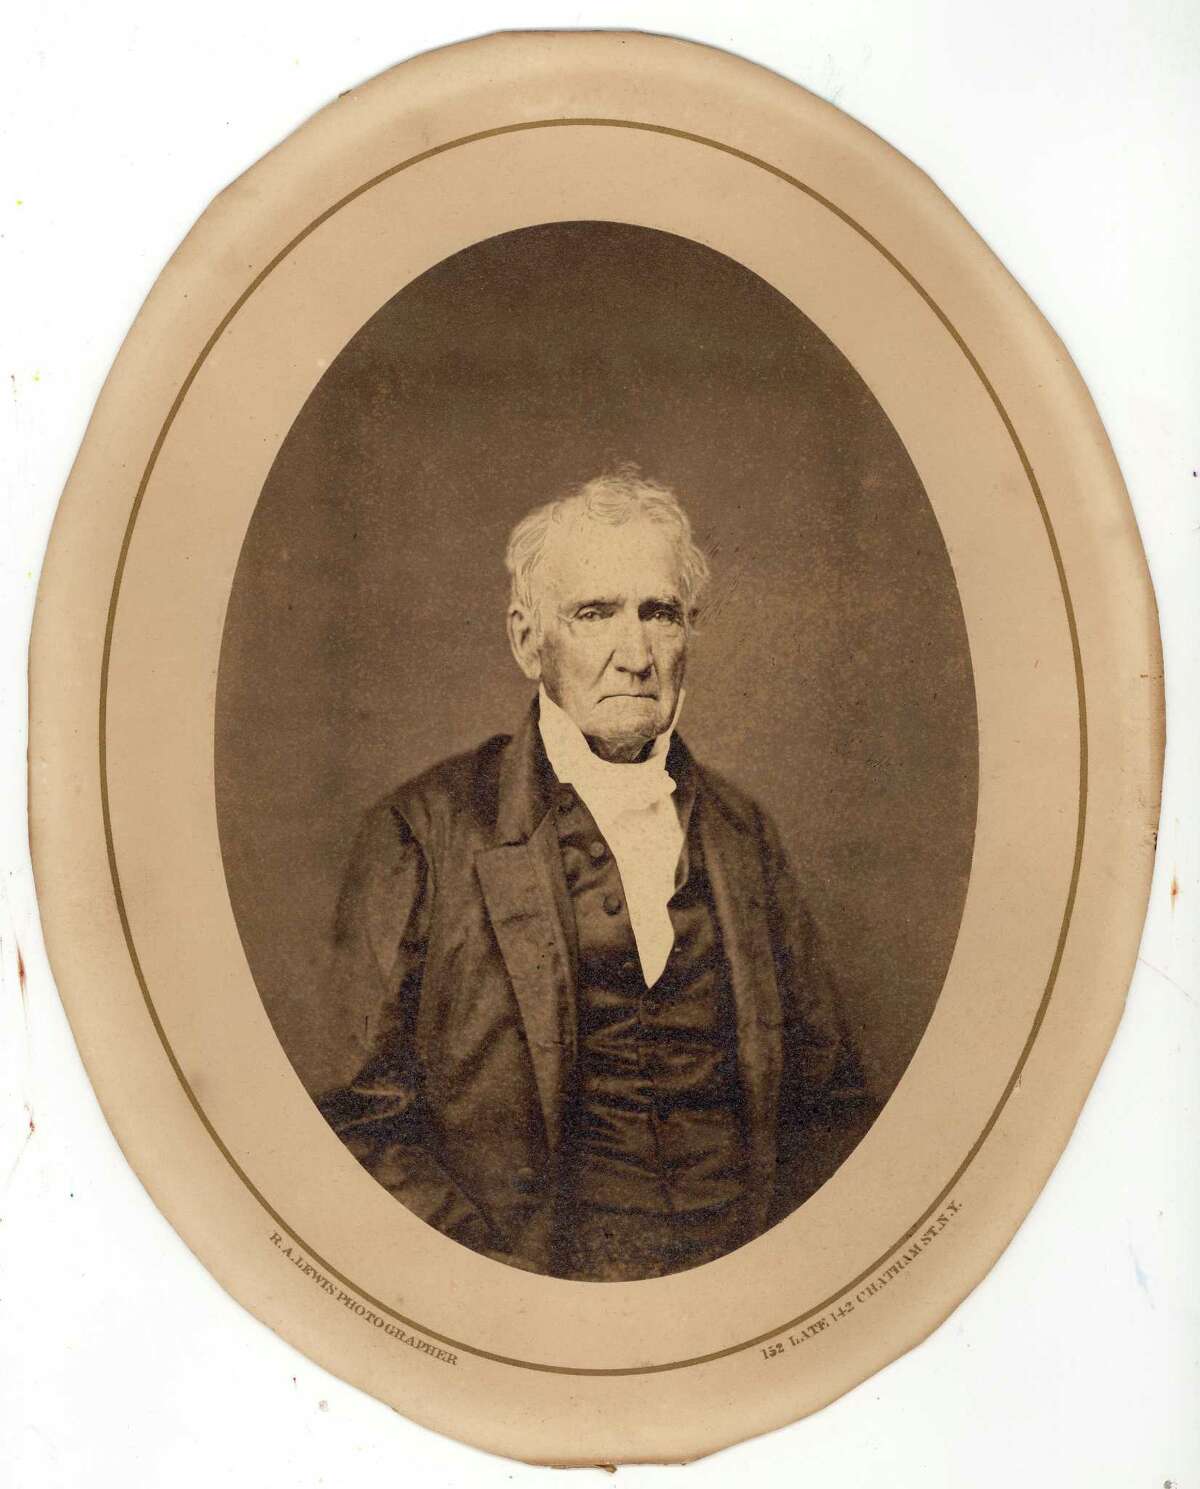 Dr. Darius Mead, who founded Greenwich Academy in 1826.